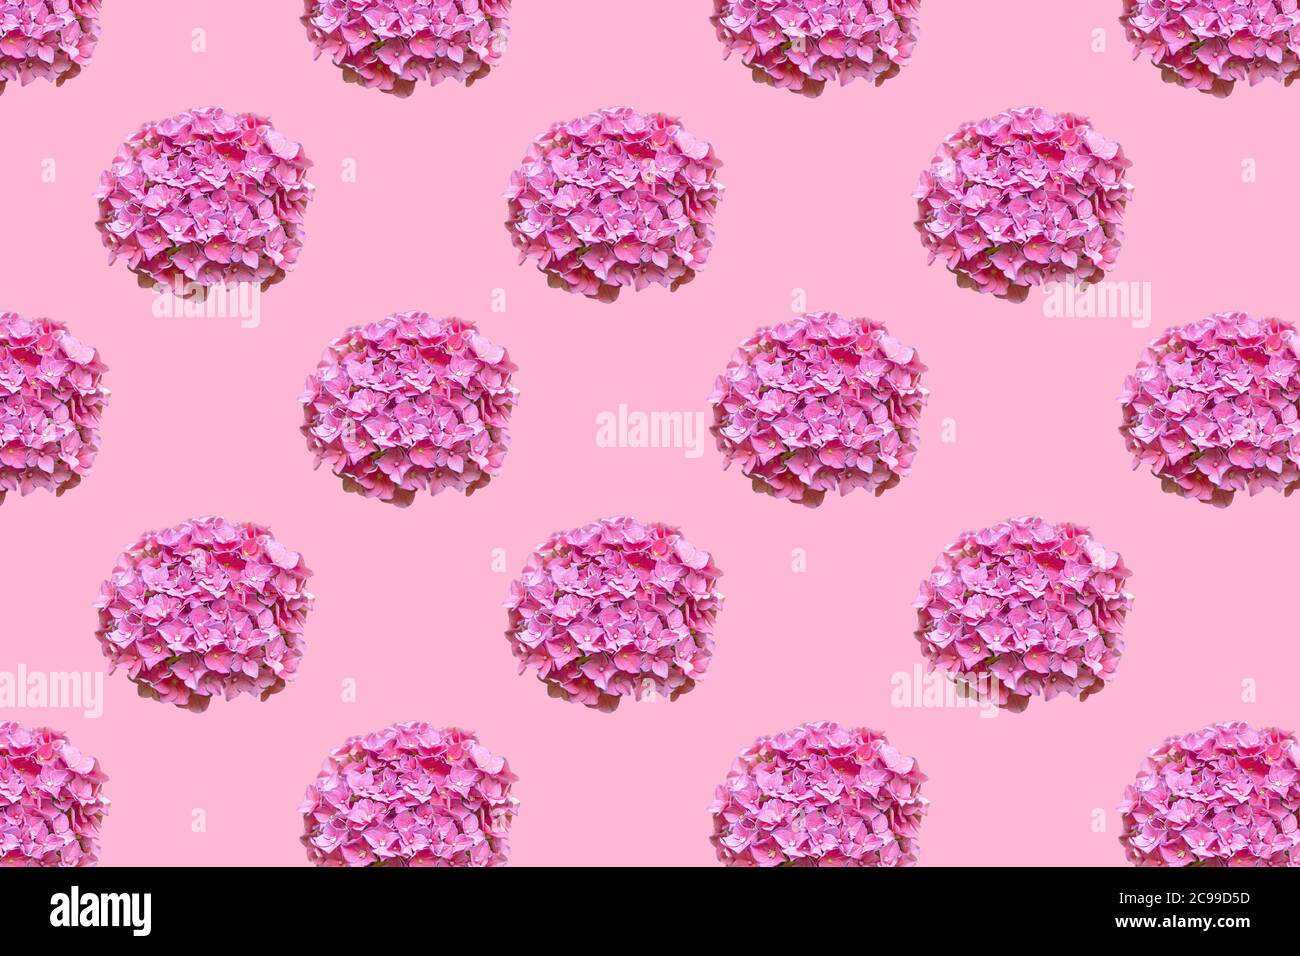 Hydrangea common names hydrangea or hortensia. Seamless pattern of beautiful pink flower hortensia on pink background. Flat lay. Stock Photo